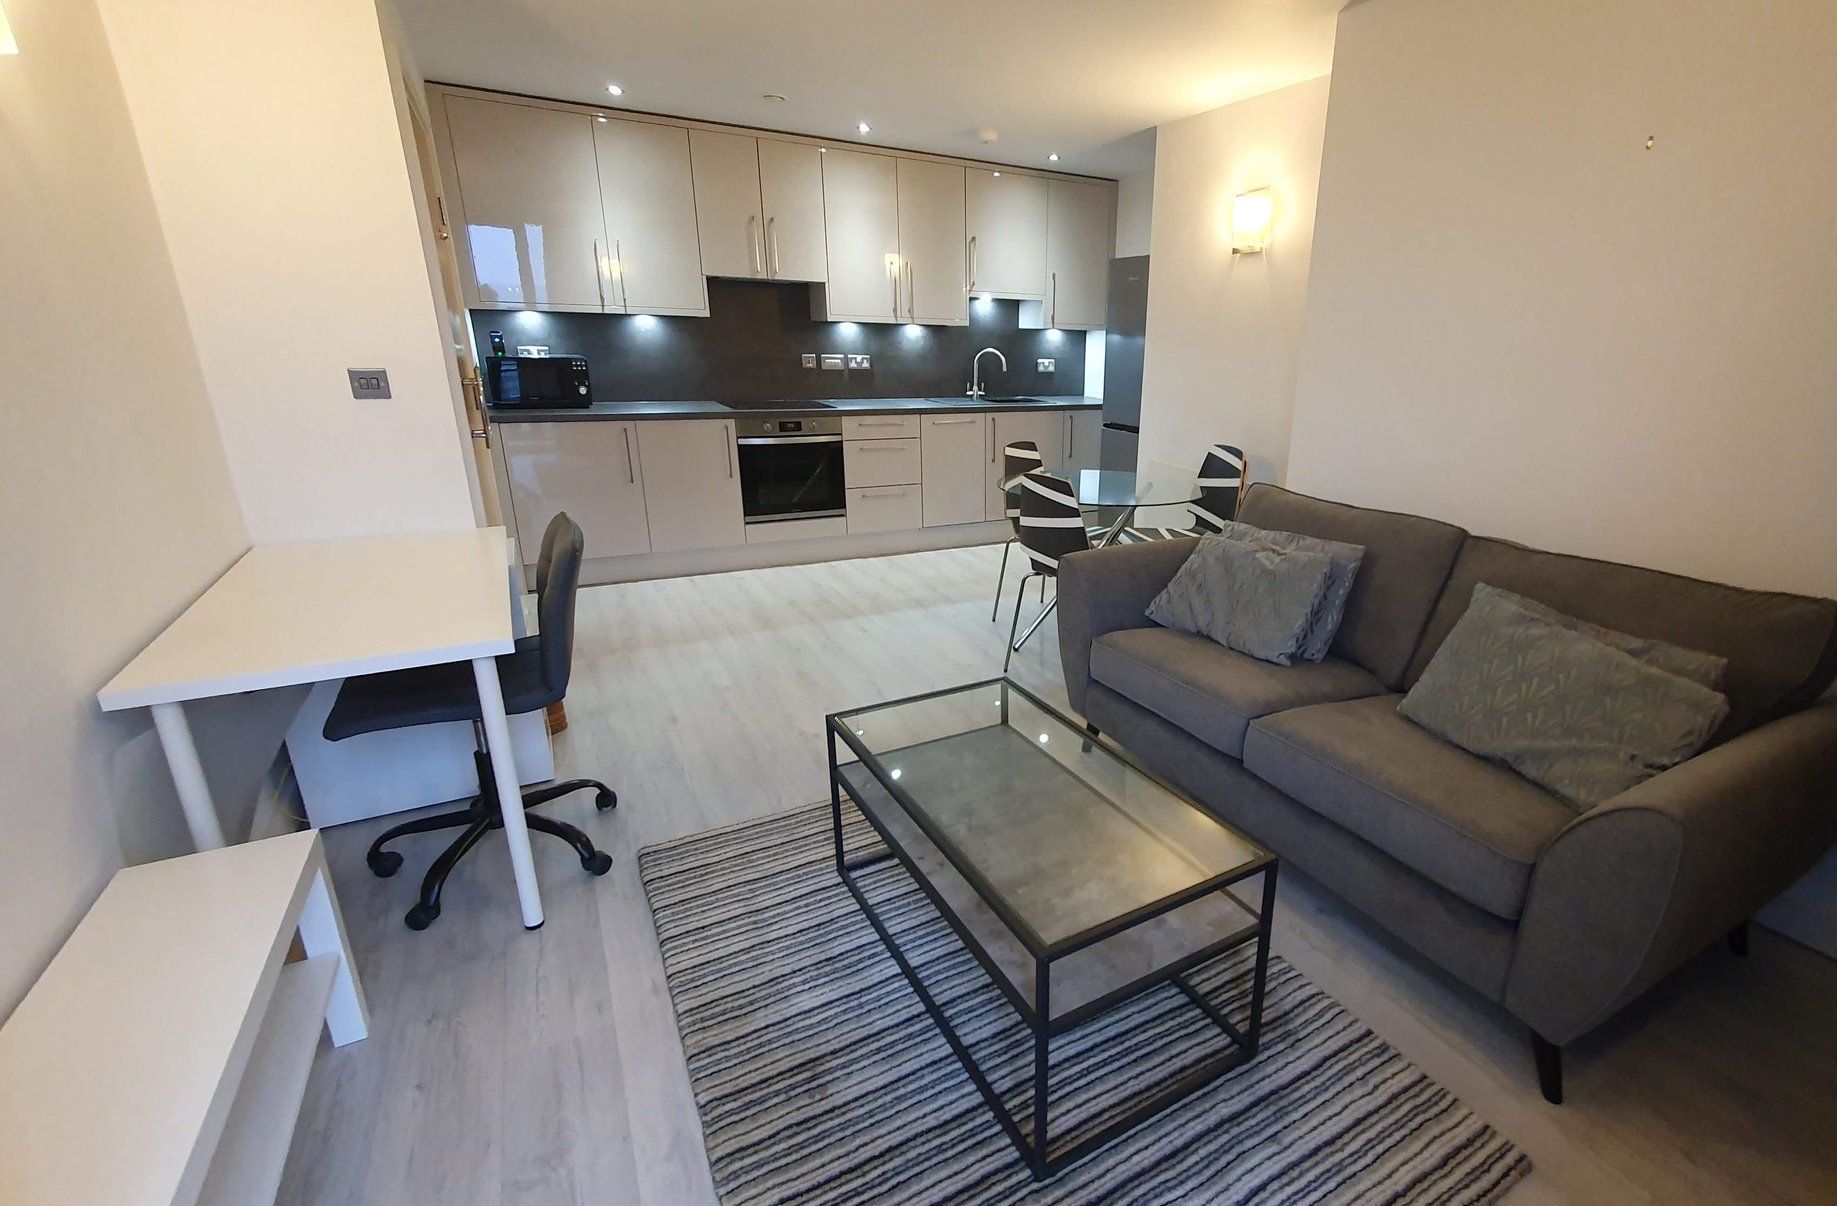 West.One Aspect 1 bedroom apartment to rent, Sheffield city centre